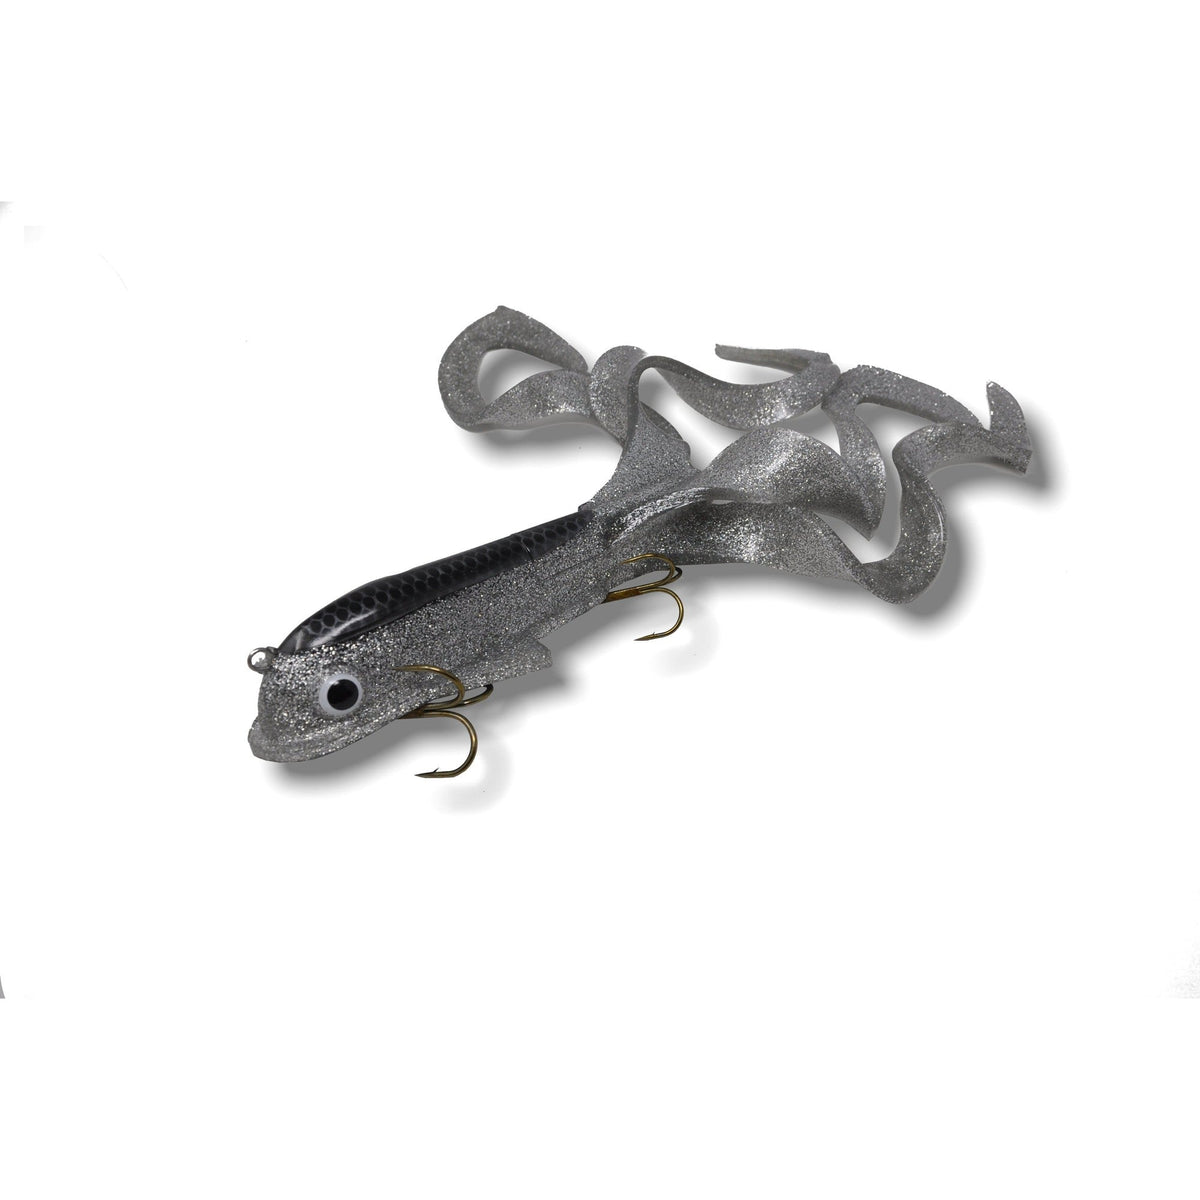 View of Rubber Musky innovation Quad Dawg Cisco available at EZOKO Pike and Musky Shop